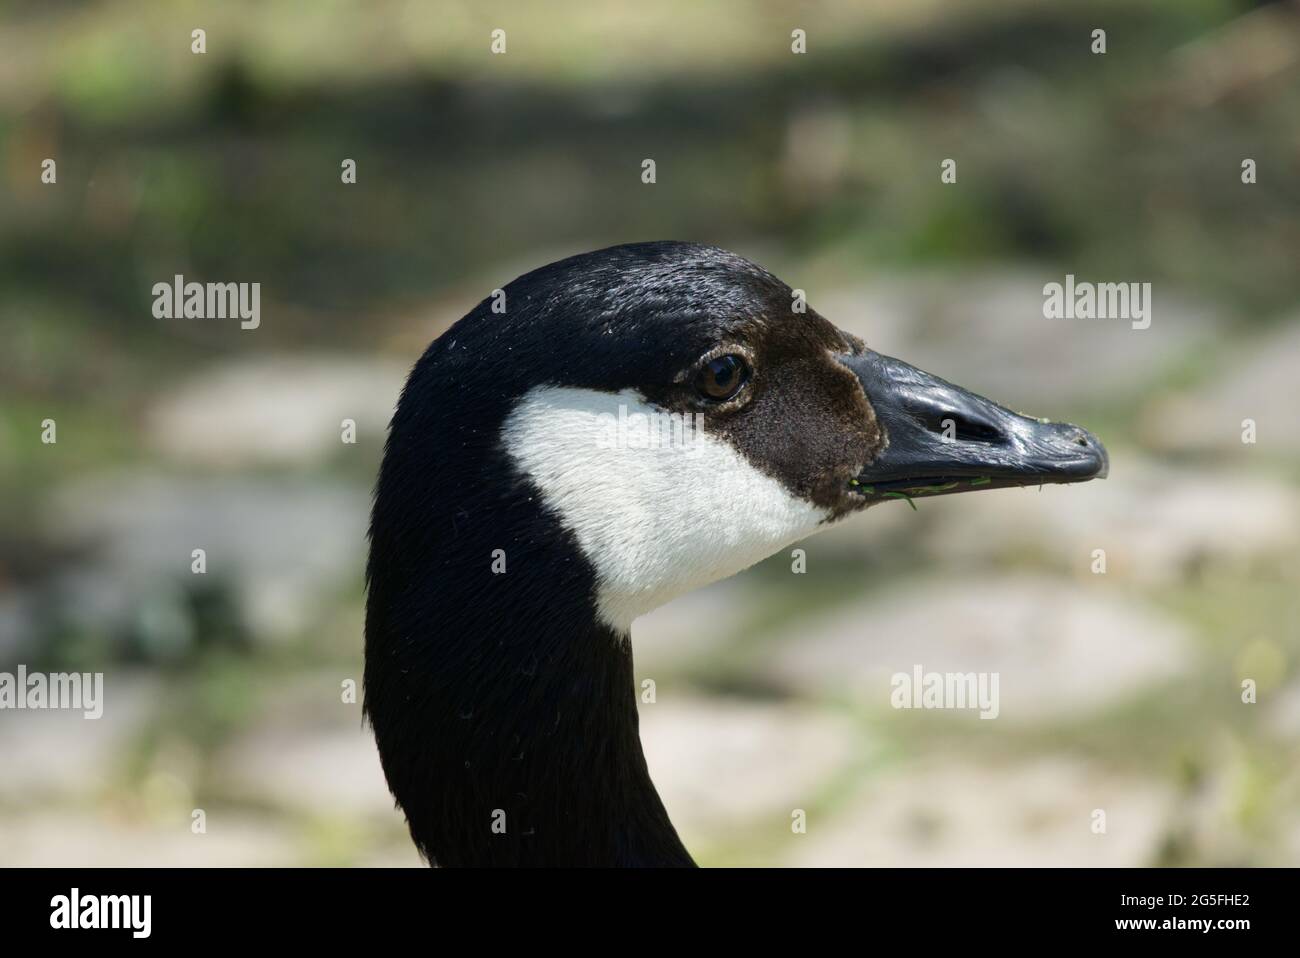 Canadian goose head with soft background Stock Photo - Alamy